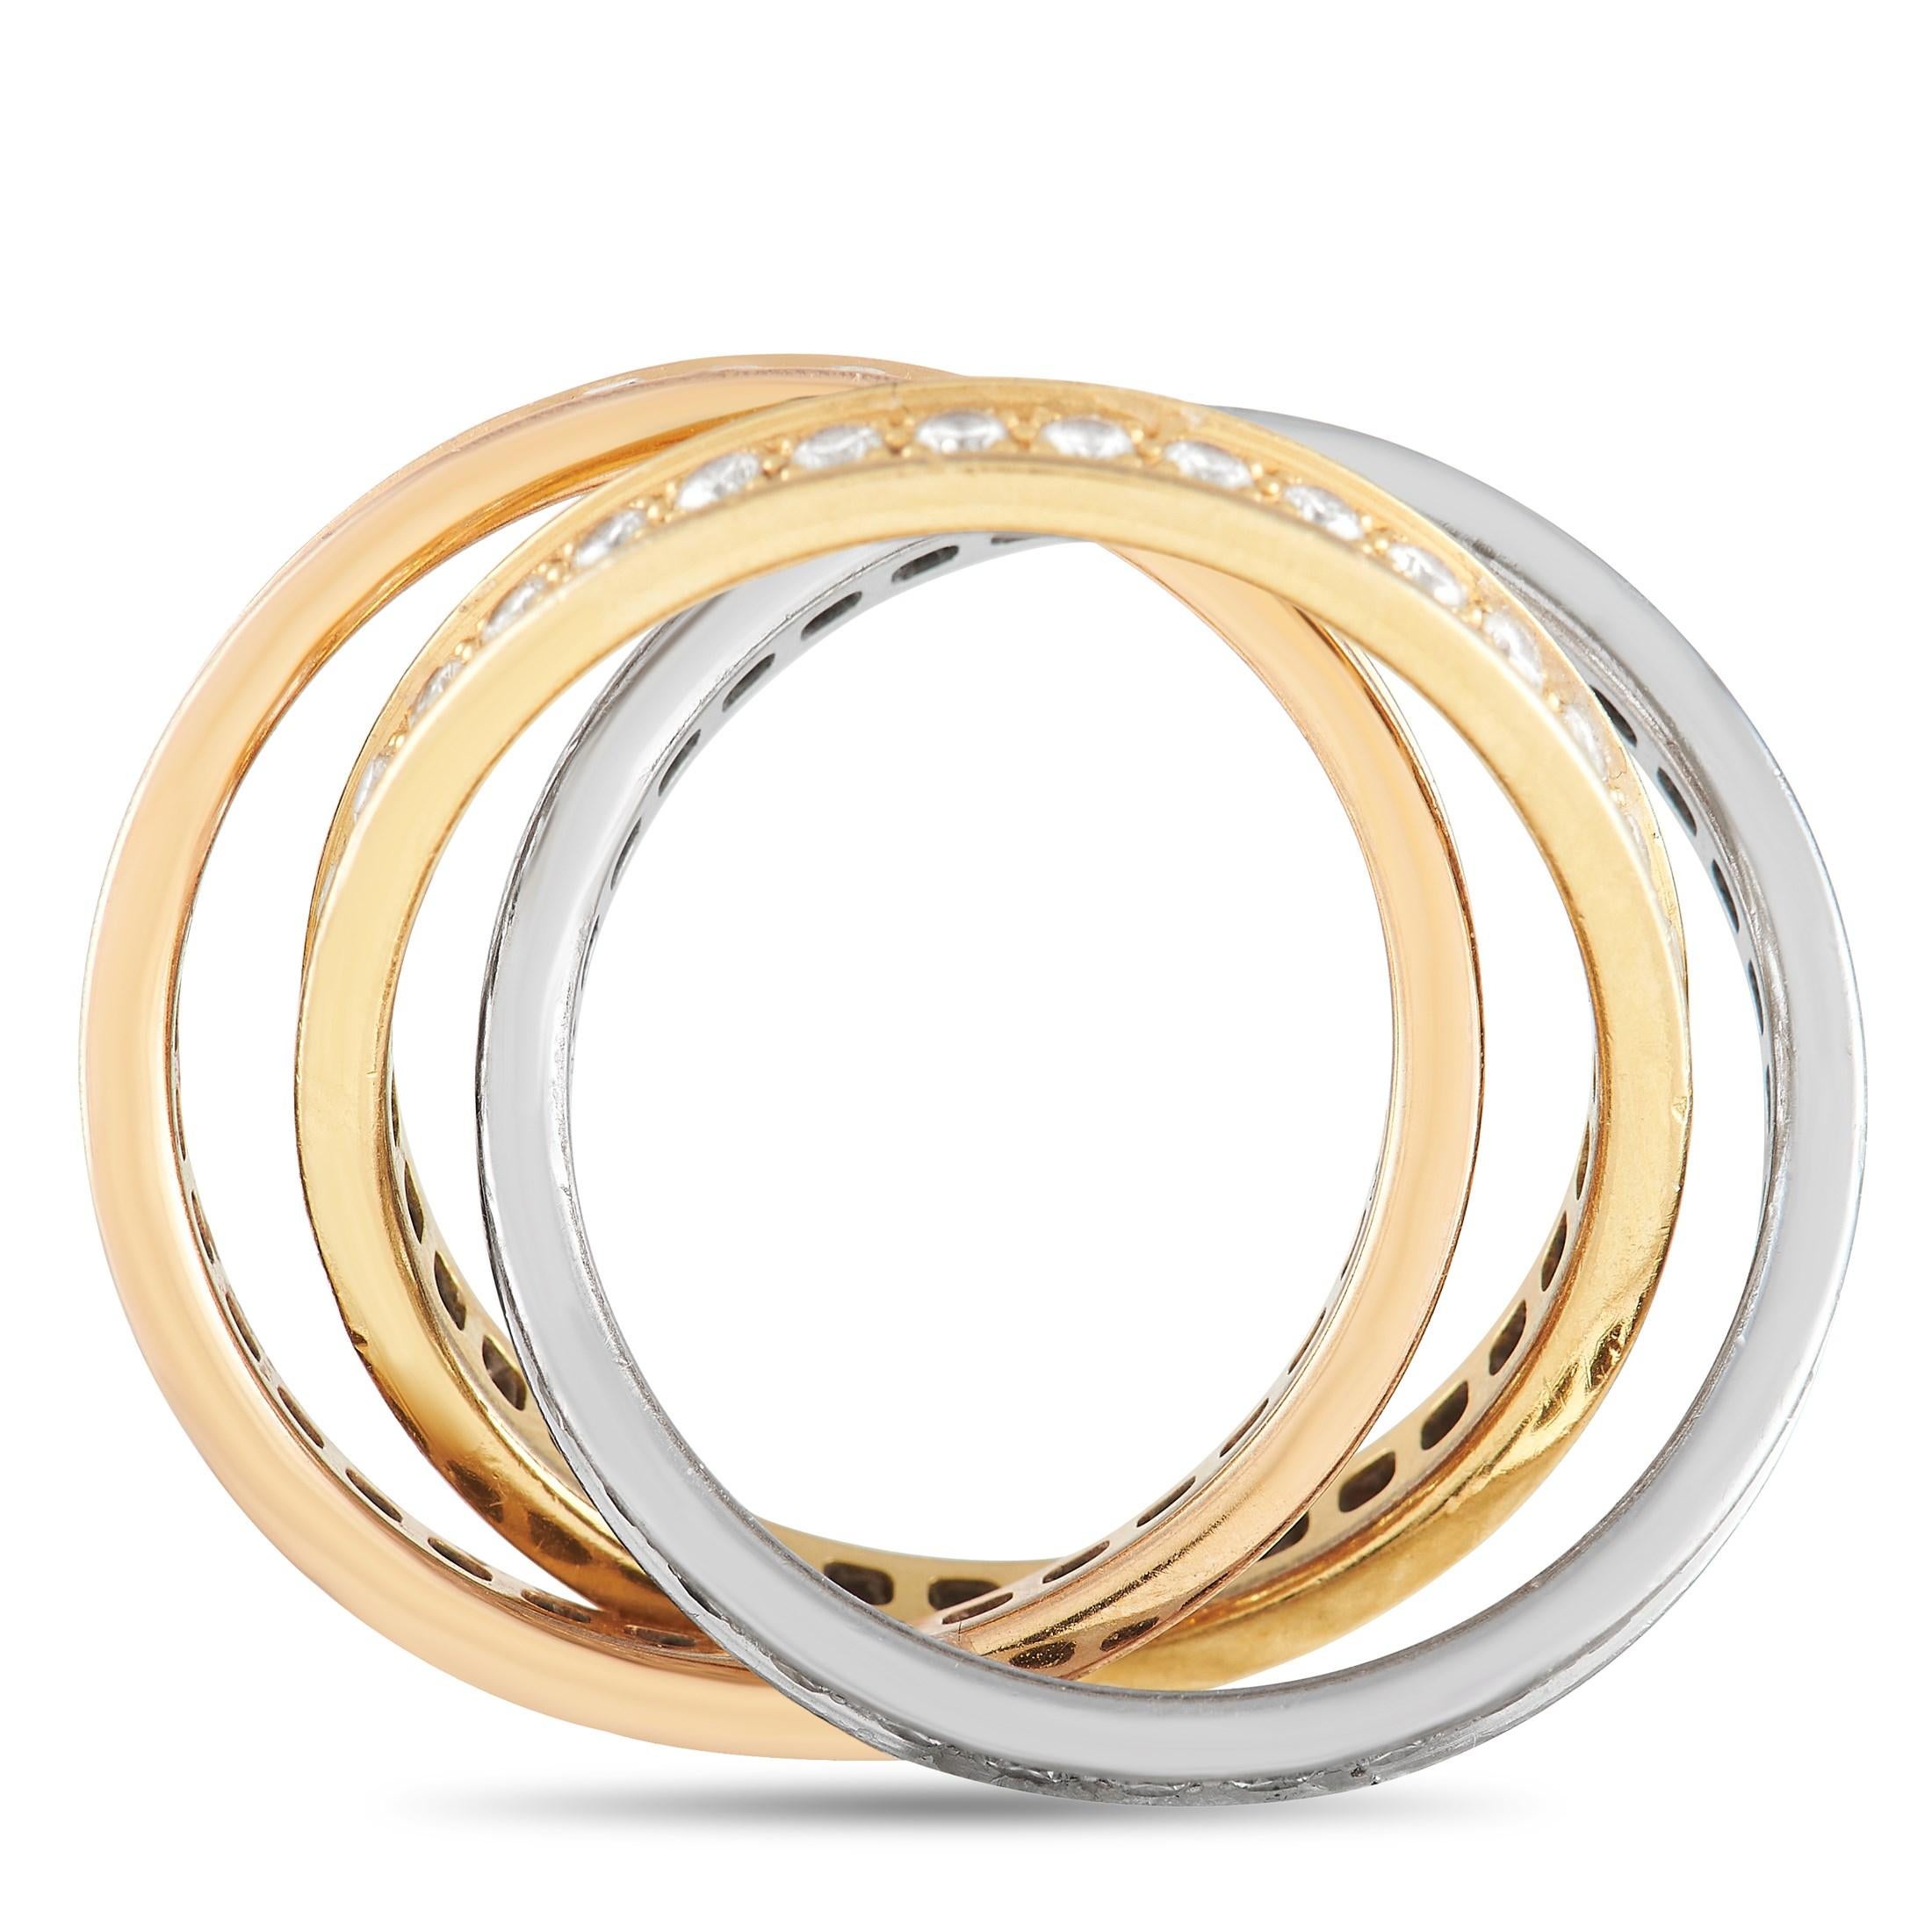 Just as its name suggests, this Cartier Trinity ring features a trio of interwoven bands made from 18K Yellow Gold, 18K White Gold, and 18K Rose Gold. Each band also features a series of sparkling inset diamonds for an added touch of luxury.